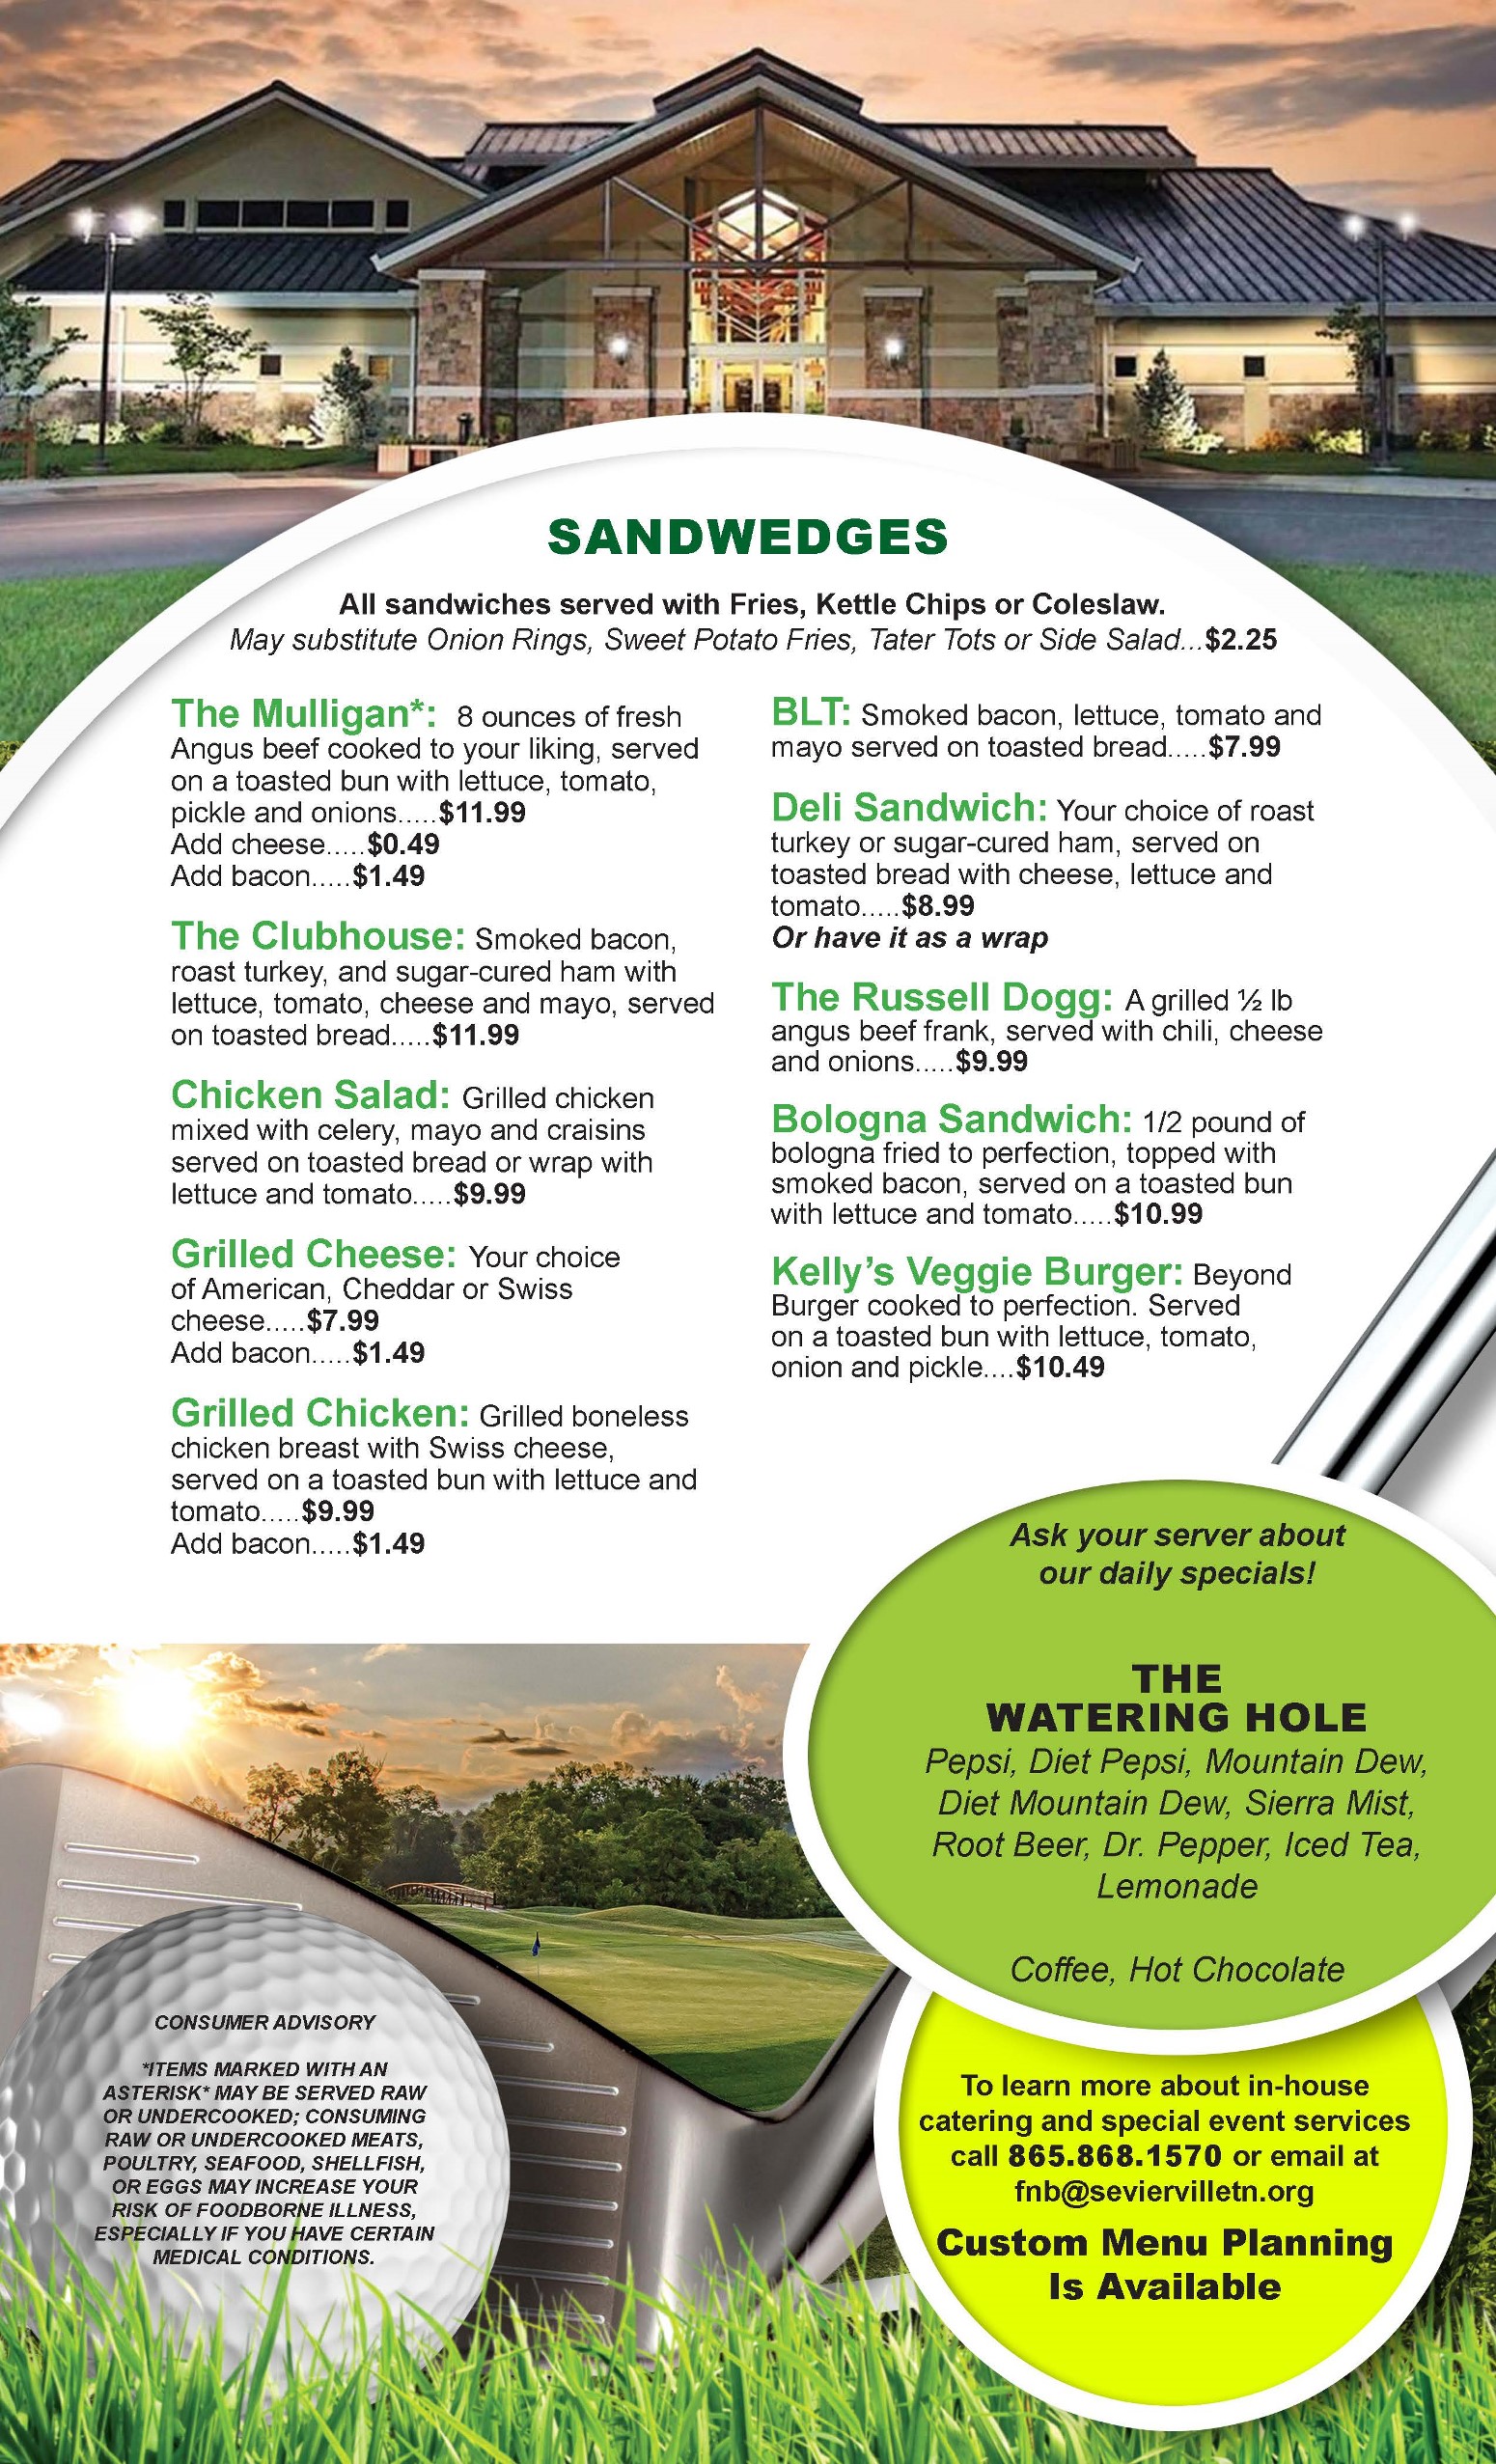 127846 1 City of Sevierville Mulligans Menu Page 2